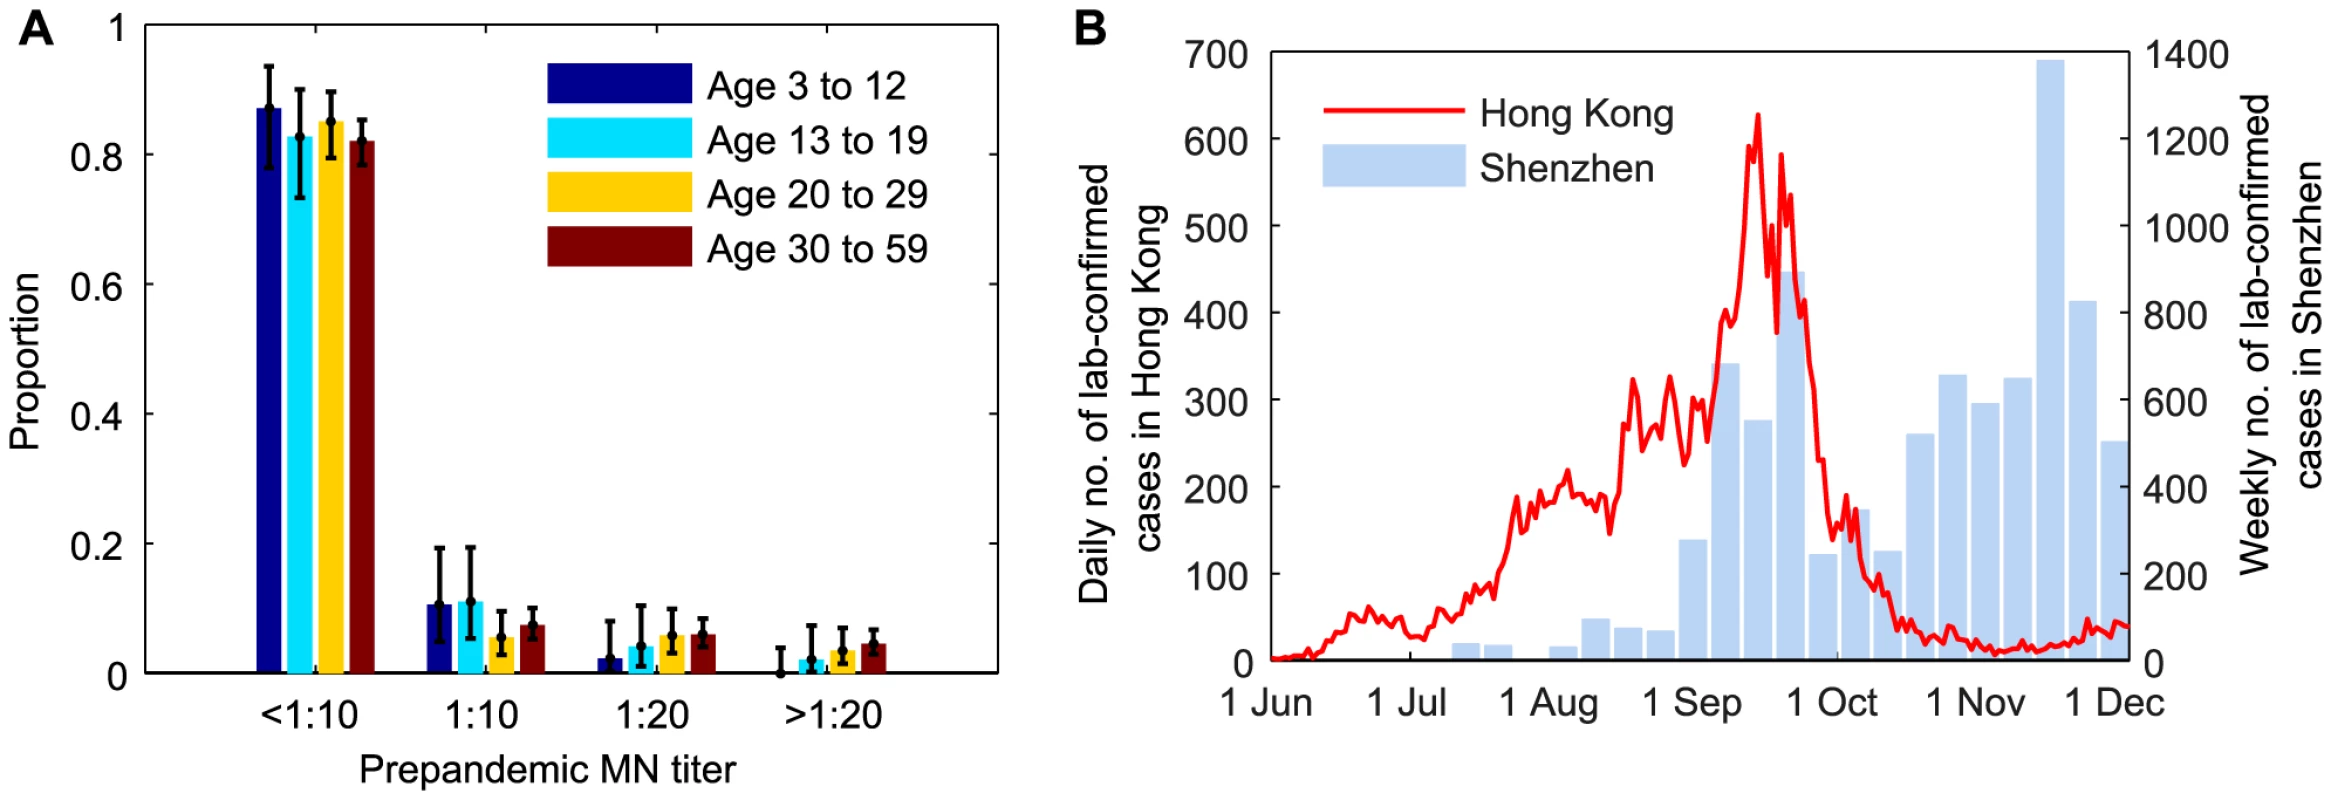 Prepandemic seroprevalence and the epidemic curve of pdmH1N1 in Hong Kong.